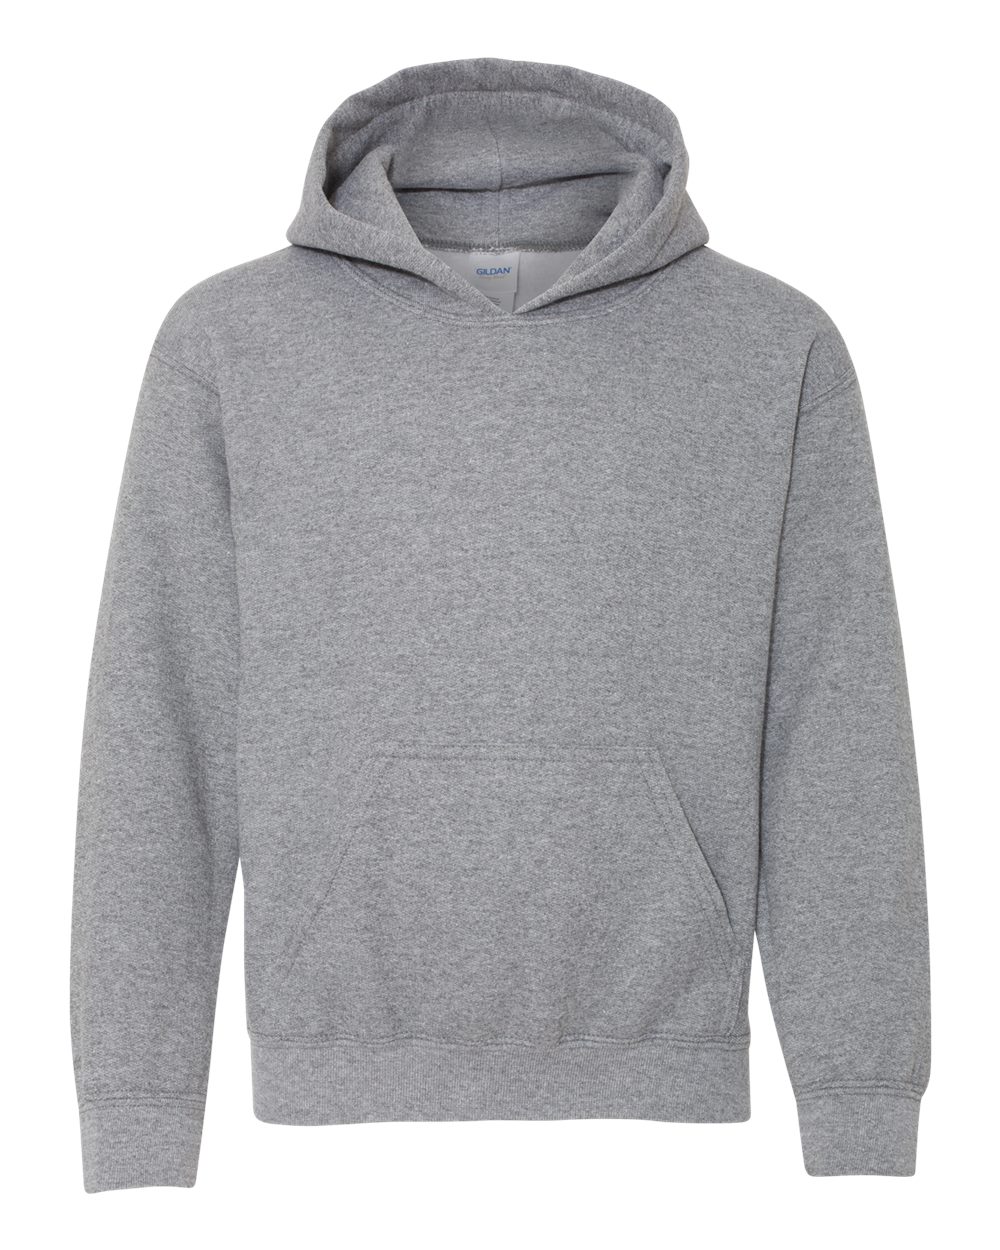 Hoodies (Youth) – DillyMerch